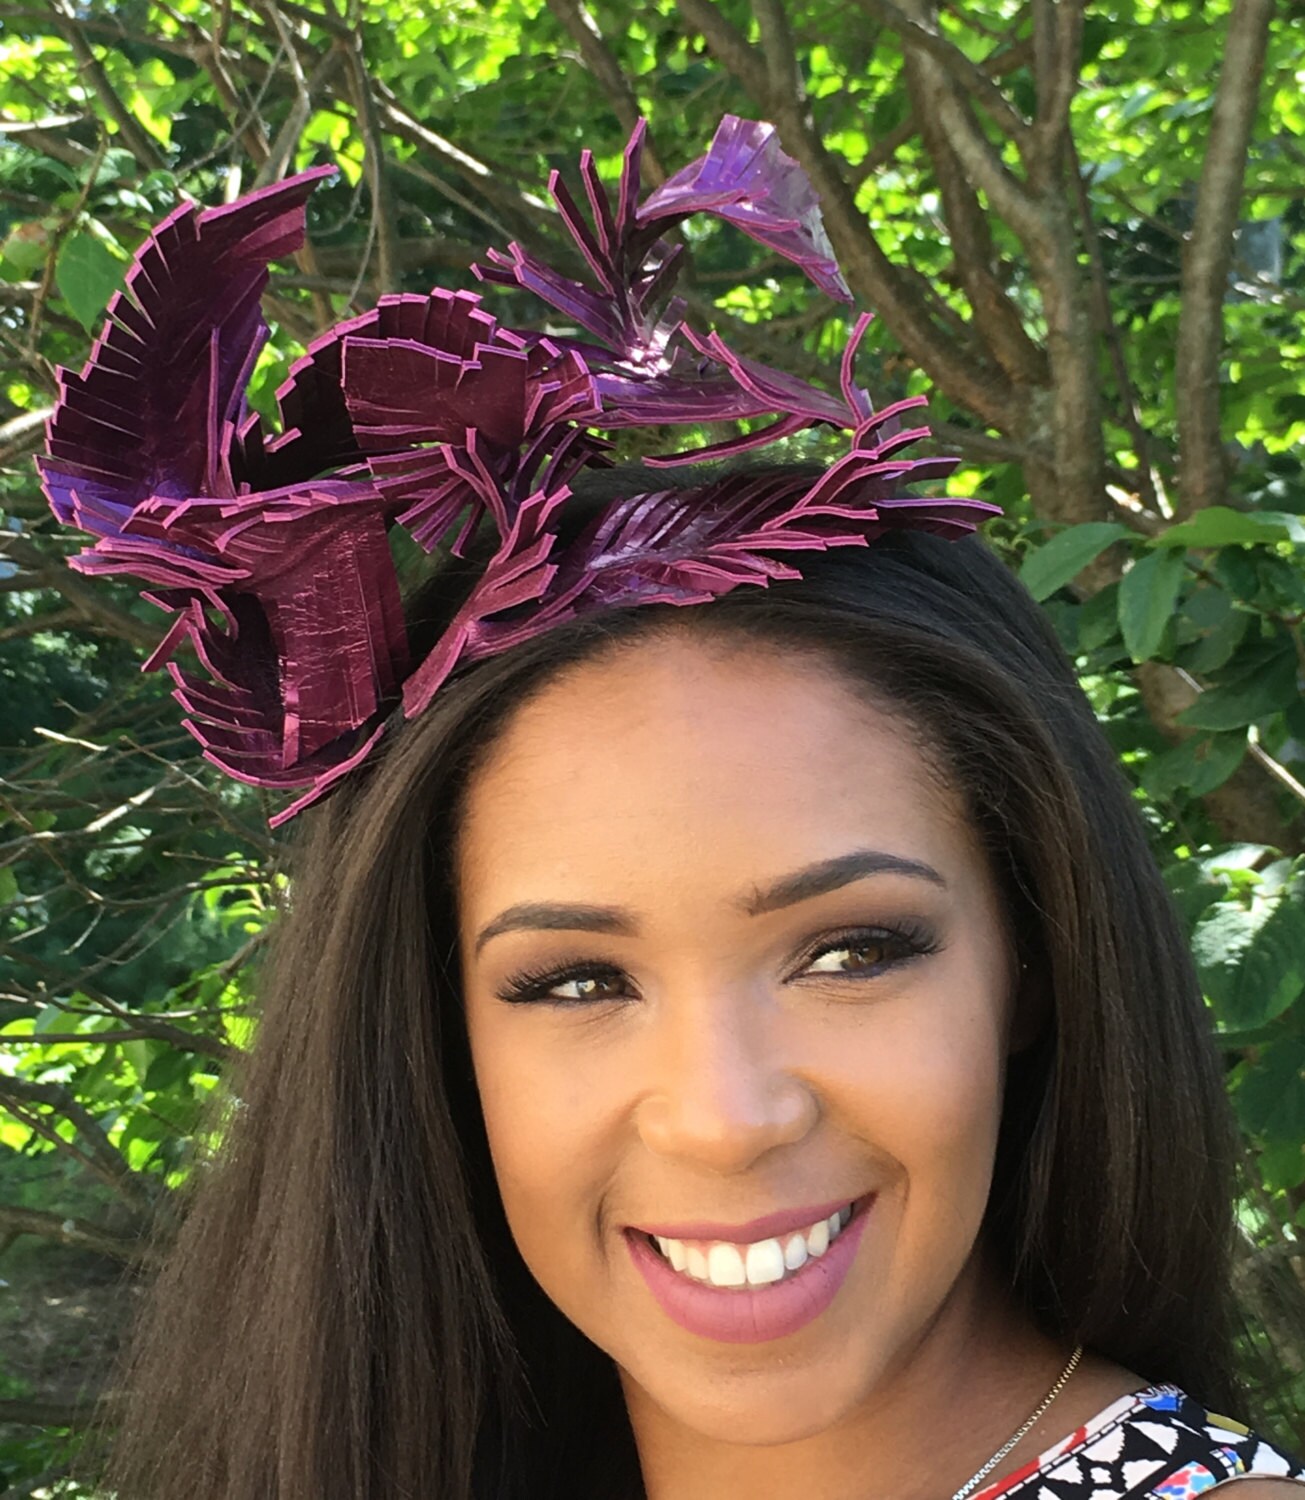 PURPLE Leather Feather Fascinator! Perfect for so many occasions - Weddings-Bridal-Race Hat-Proms-Holiday-Evening -Teen- MARDI GRAS - Party!